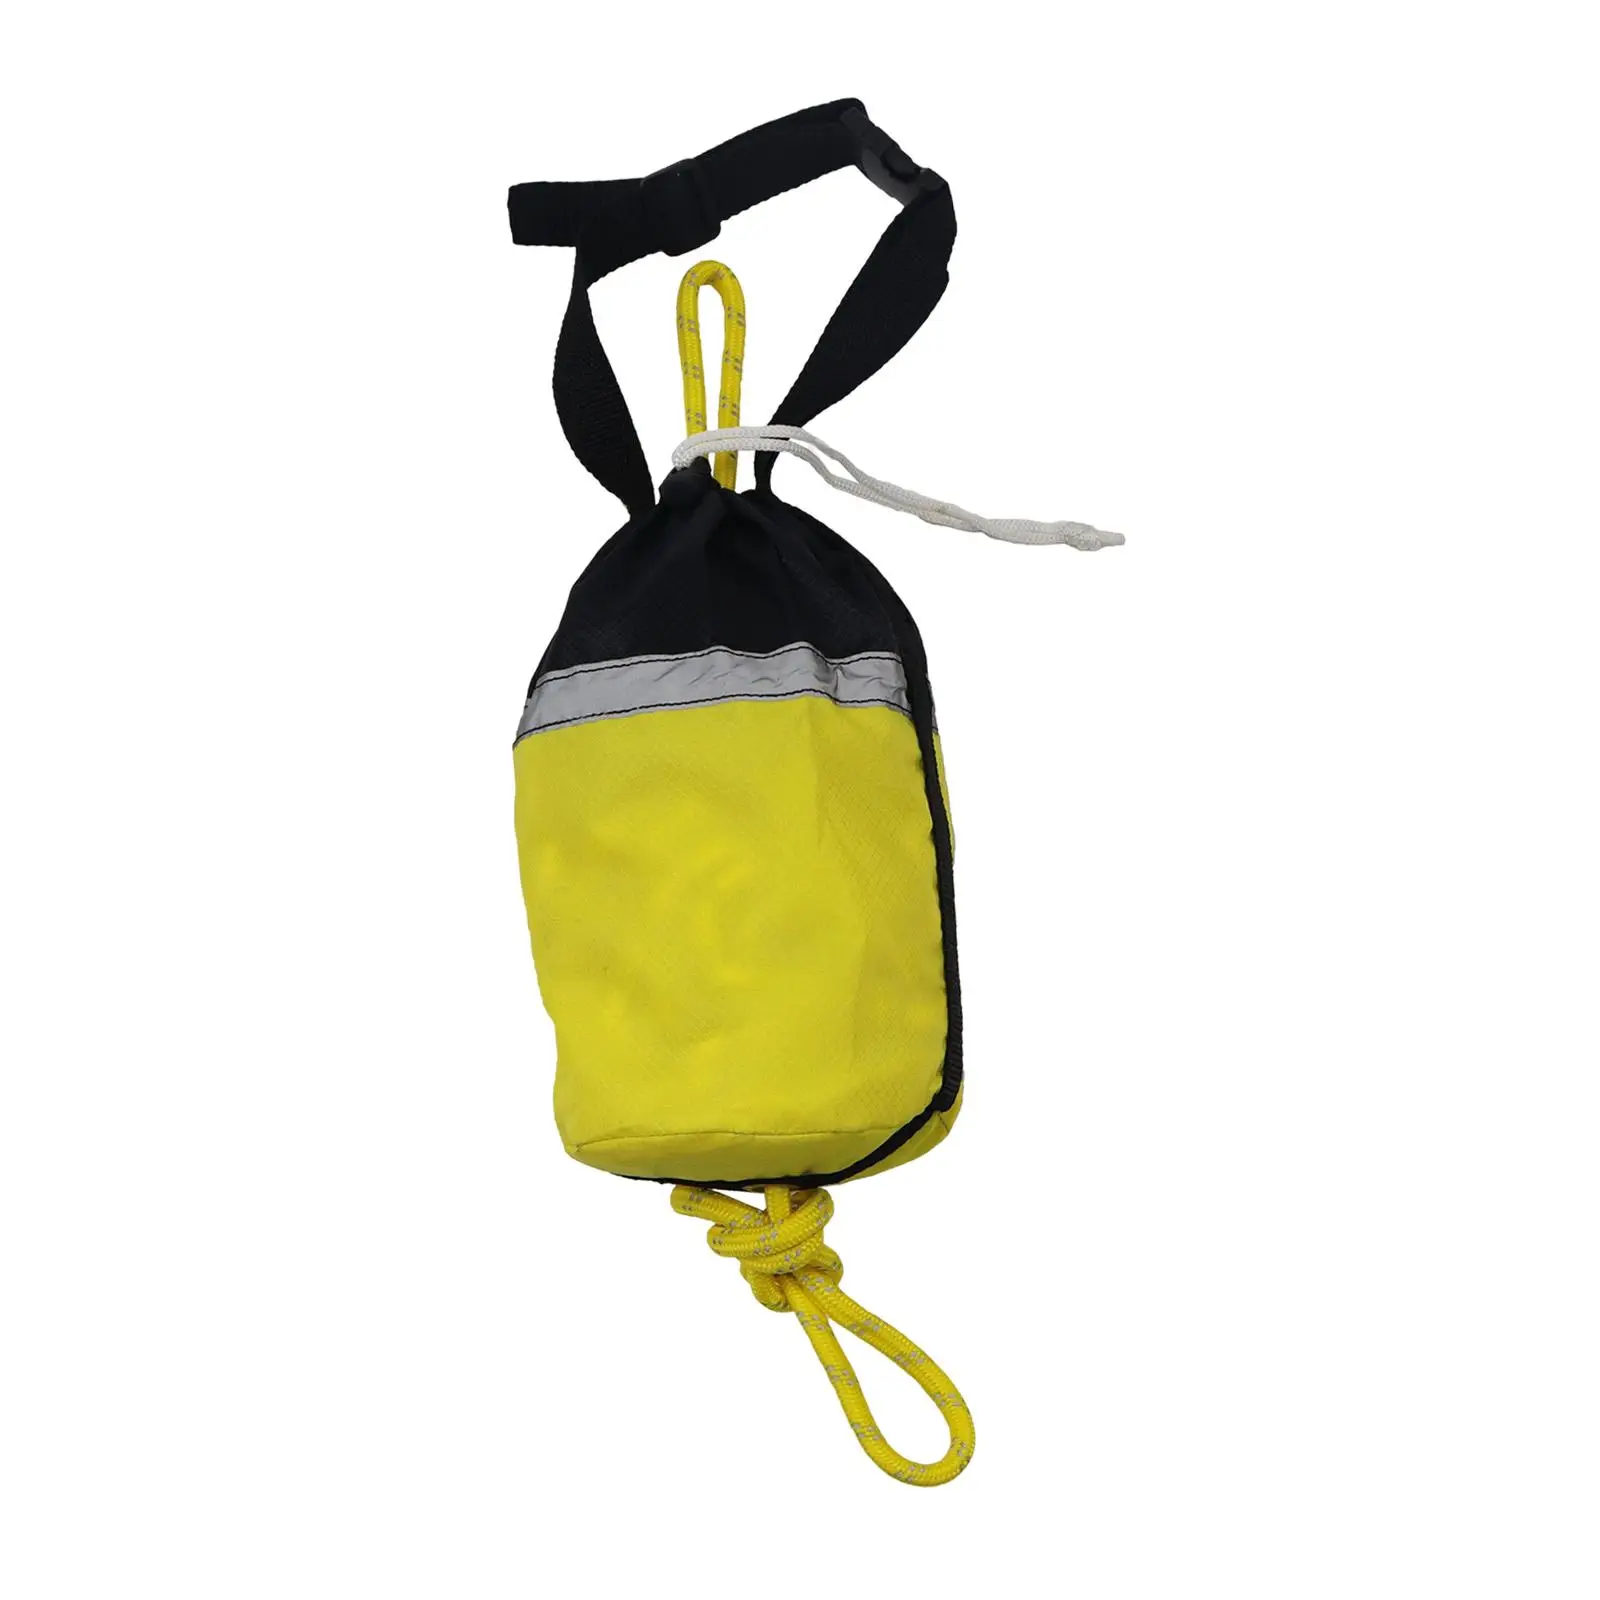 

Throw Bags for Water Rescue Floating Rescue Rope High Visibility for Boat Swimming Canoeing Water Sport Kayaking Device